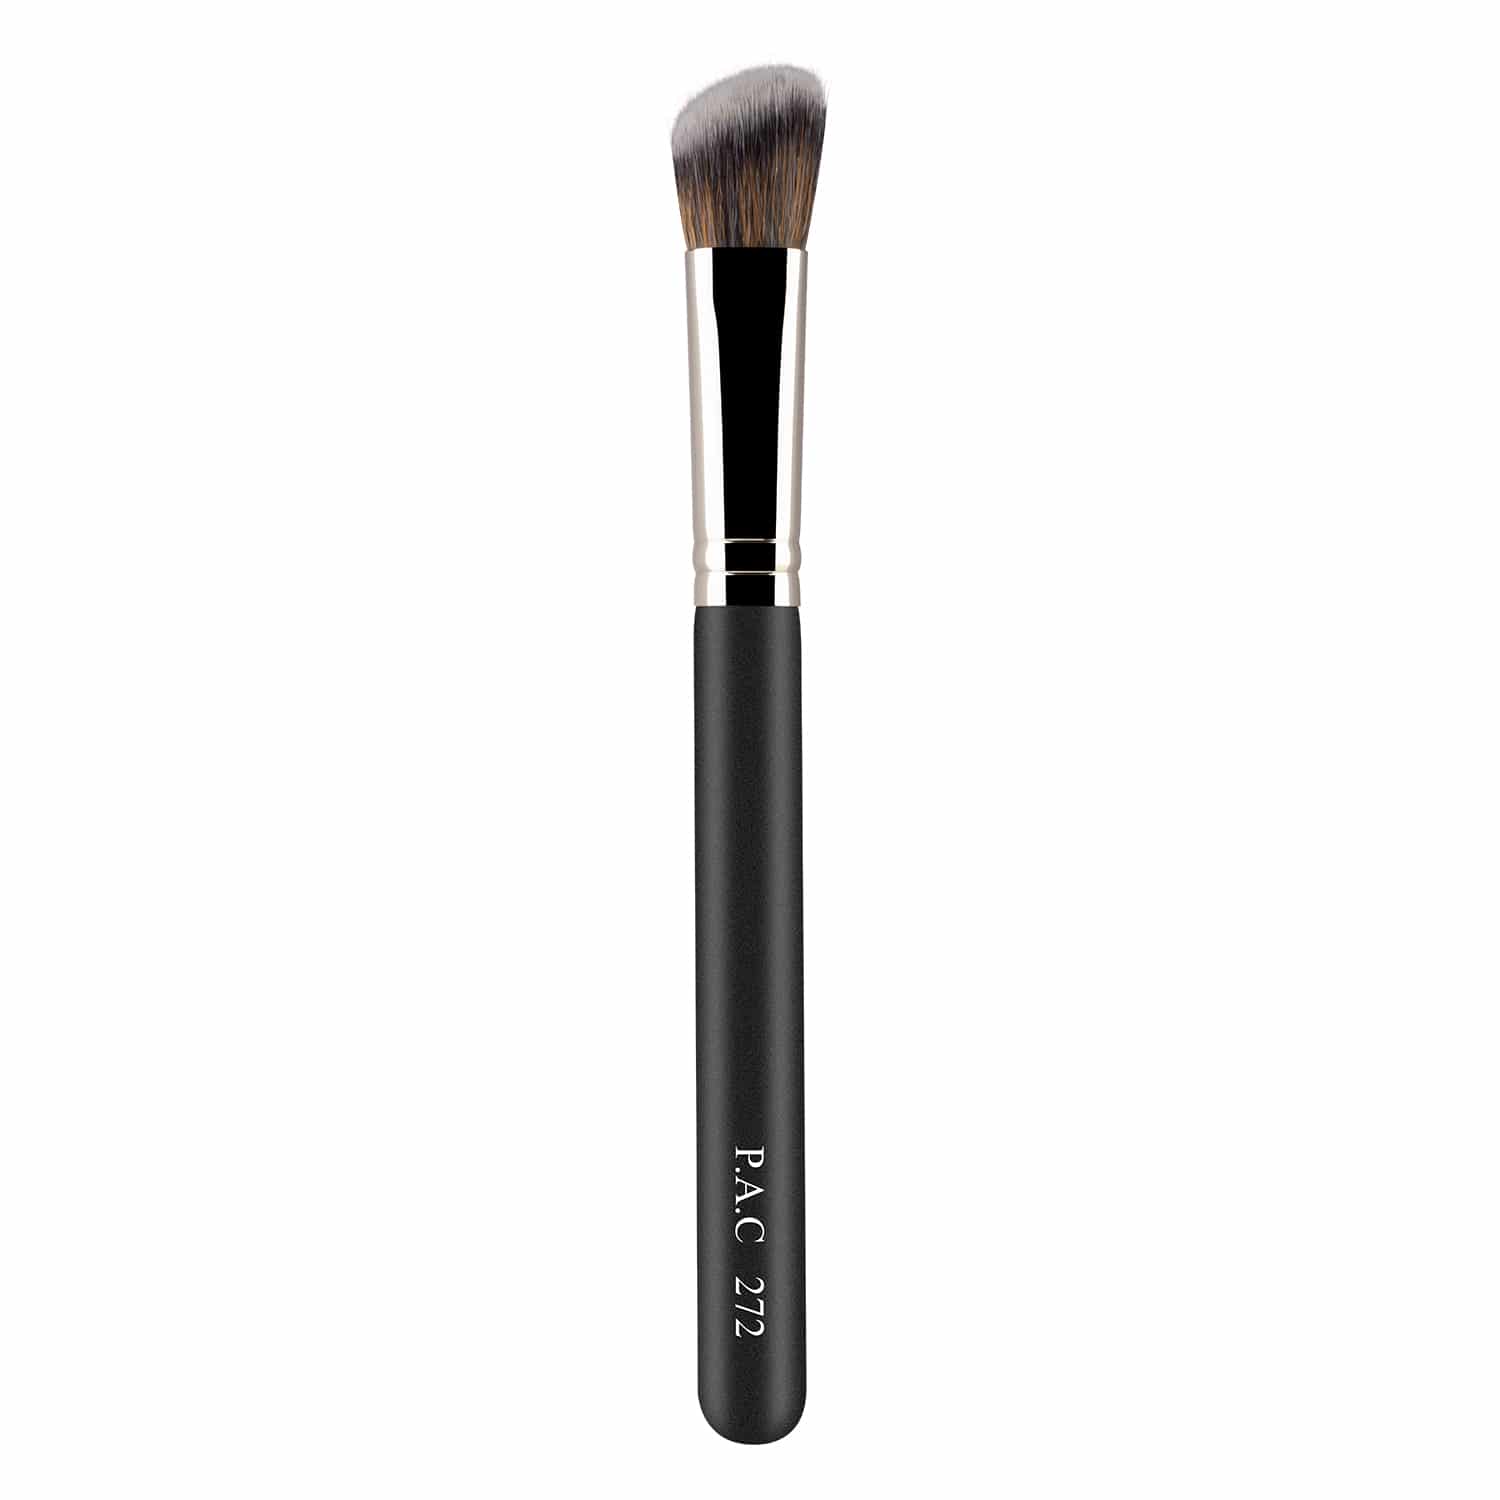 PAC Concealer Brush 272 PAC